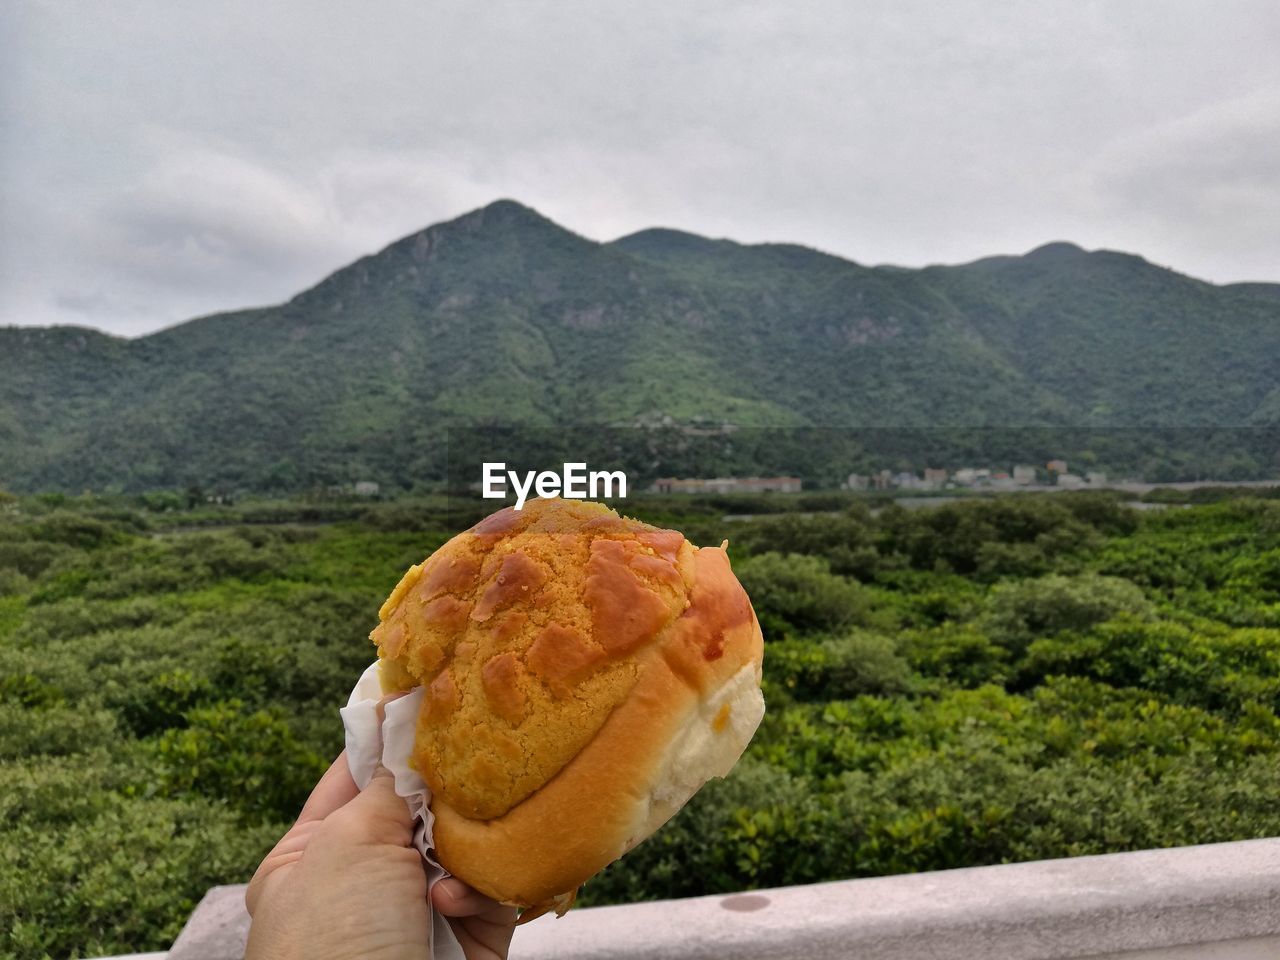 CLOSE-UP OF HAND HOLDING BREAD AGAINST MOUNTAINS